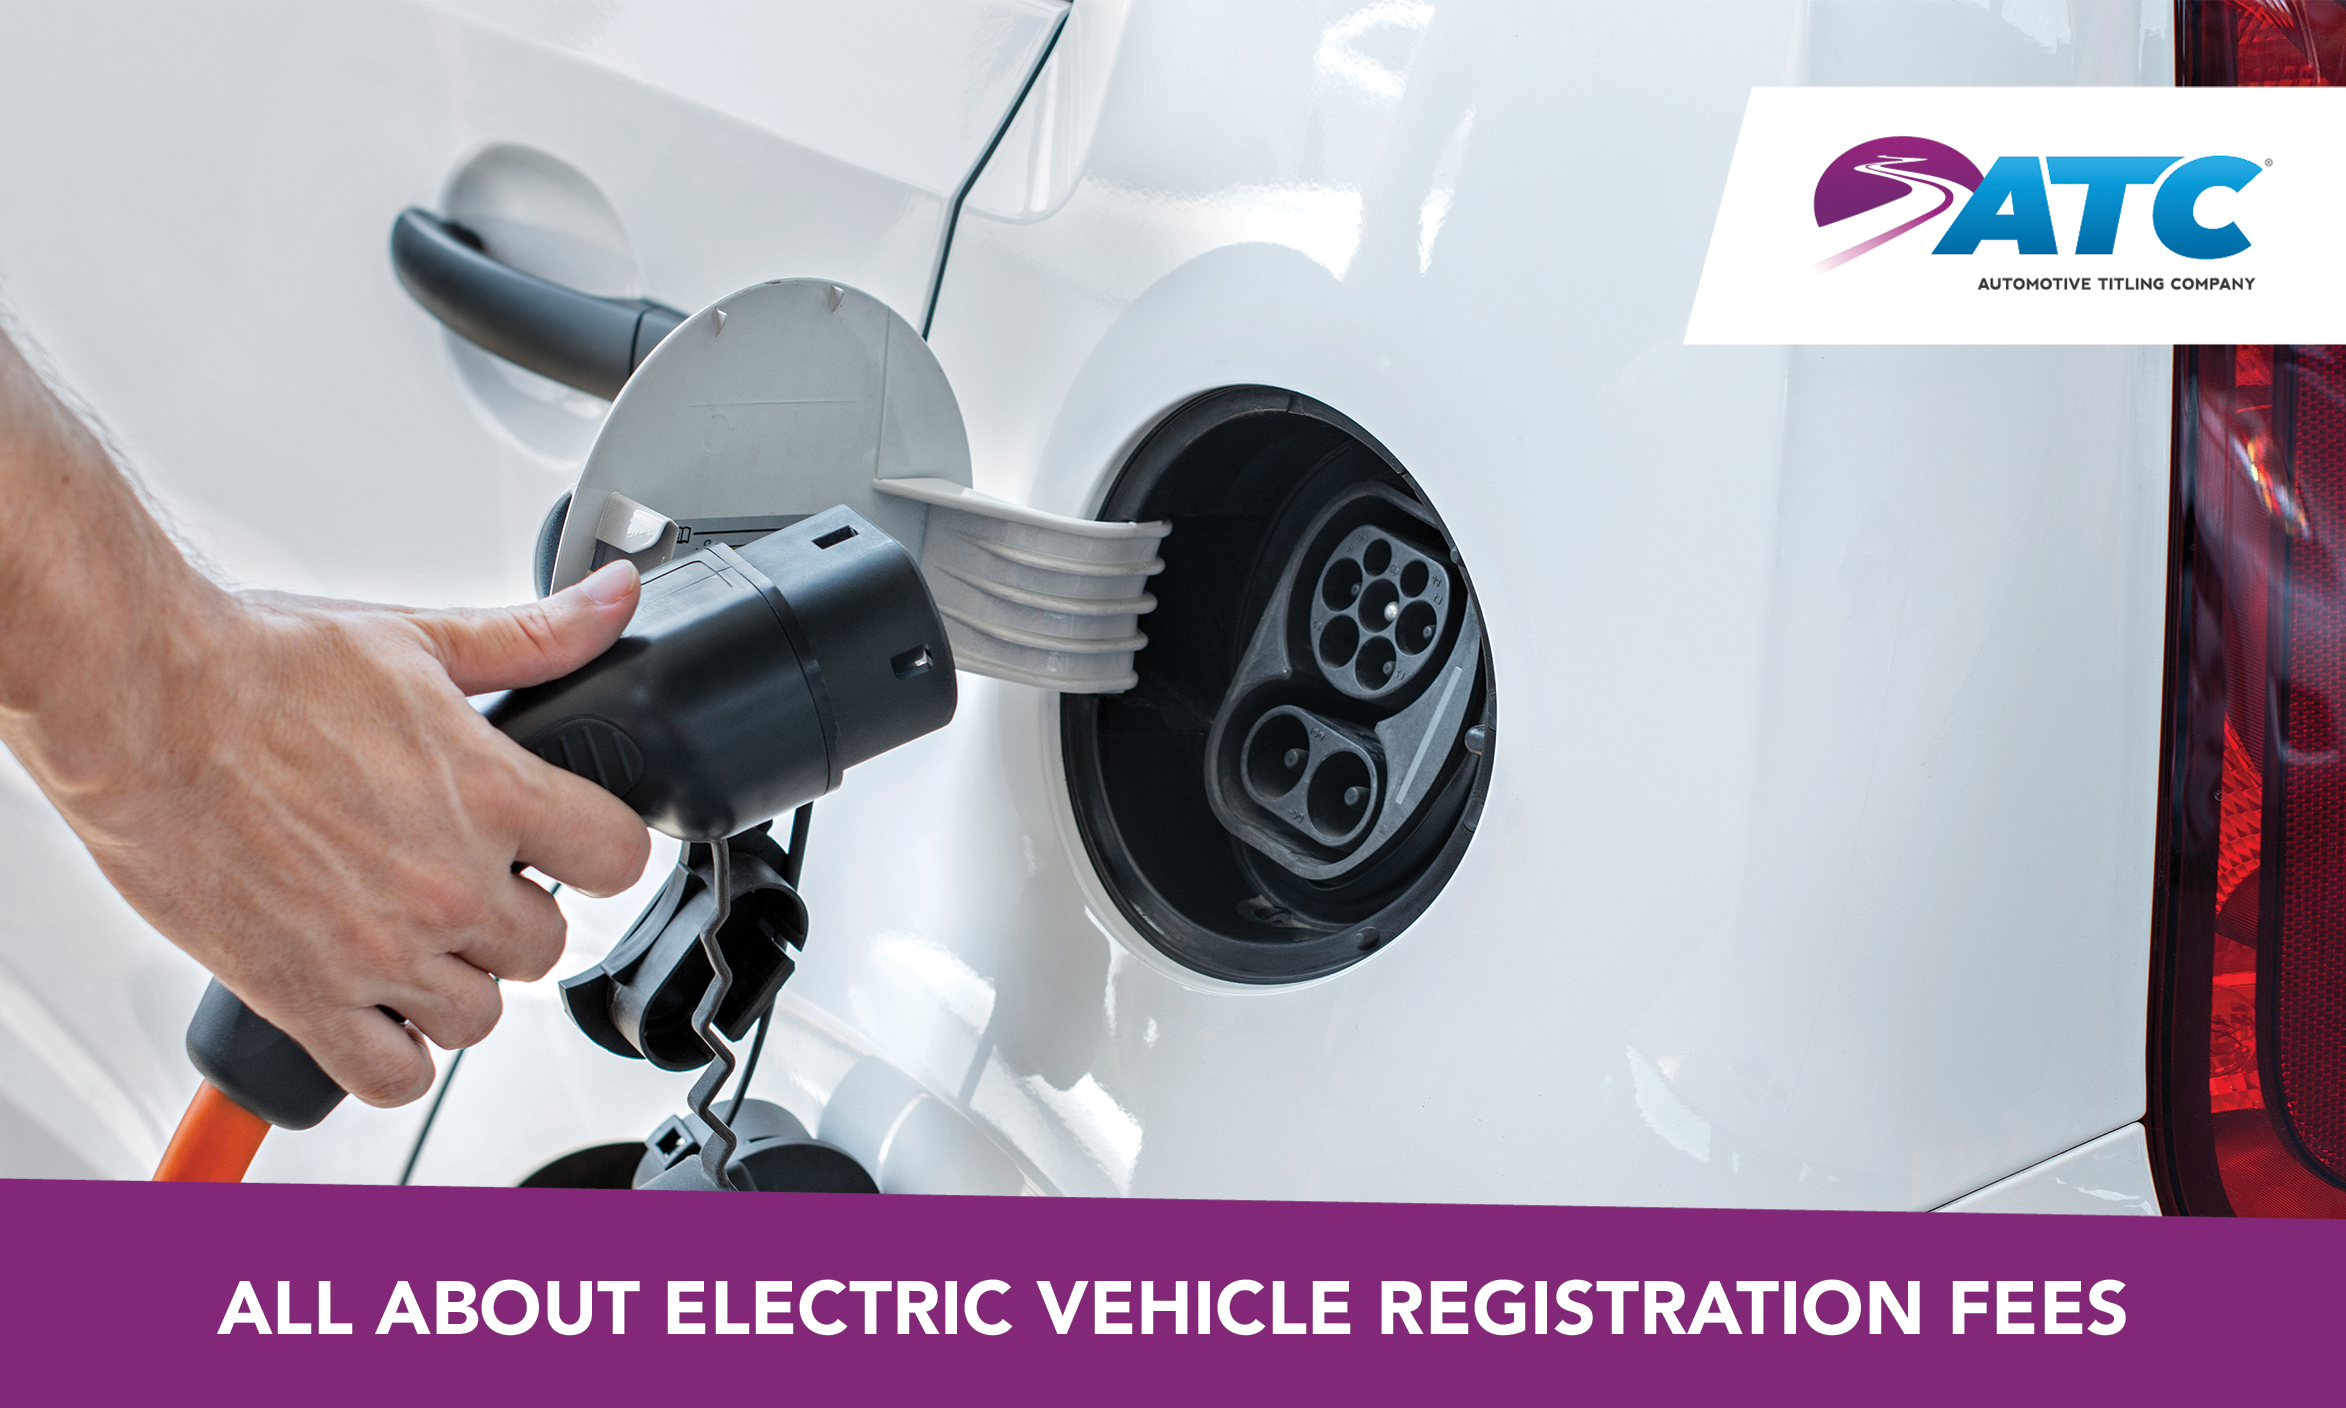 all-about-electric-vehicle-registration-fees-automotive-titling